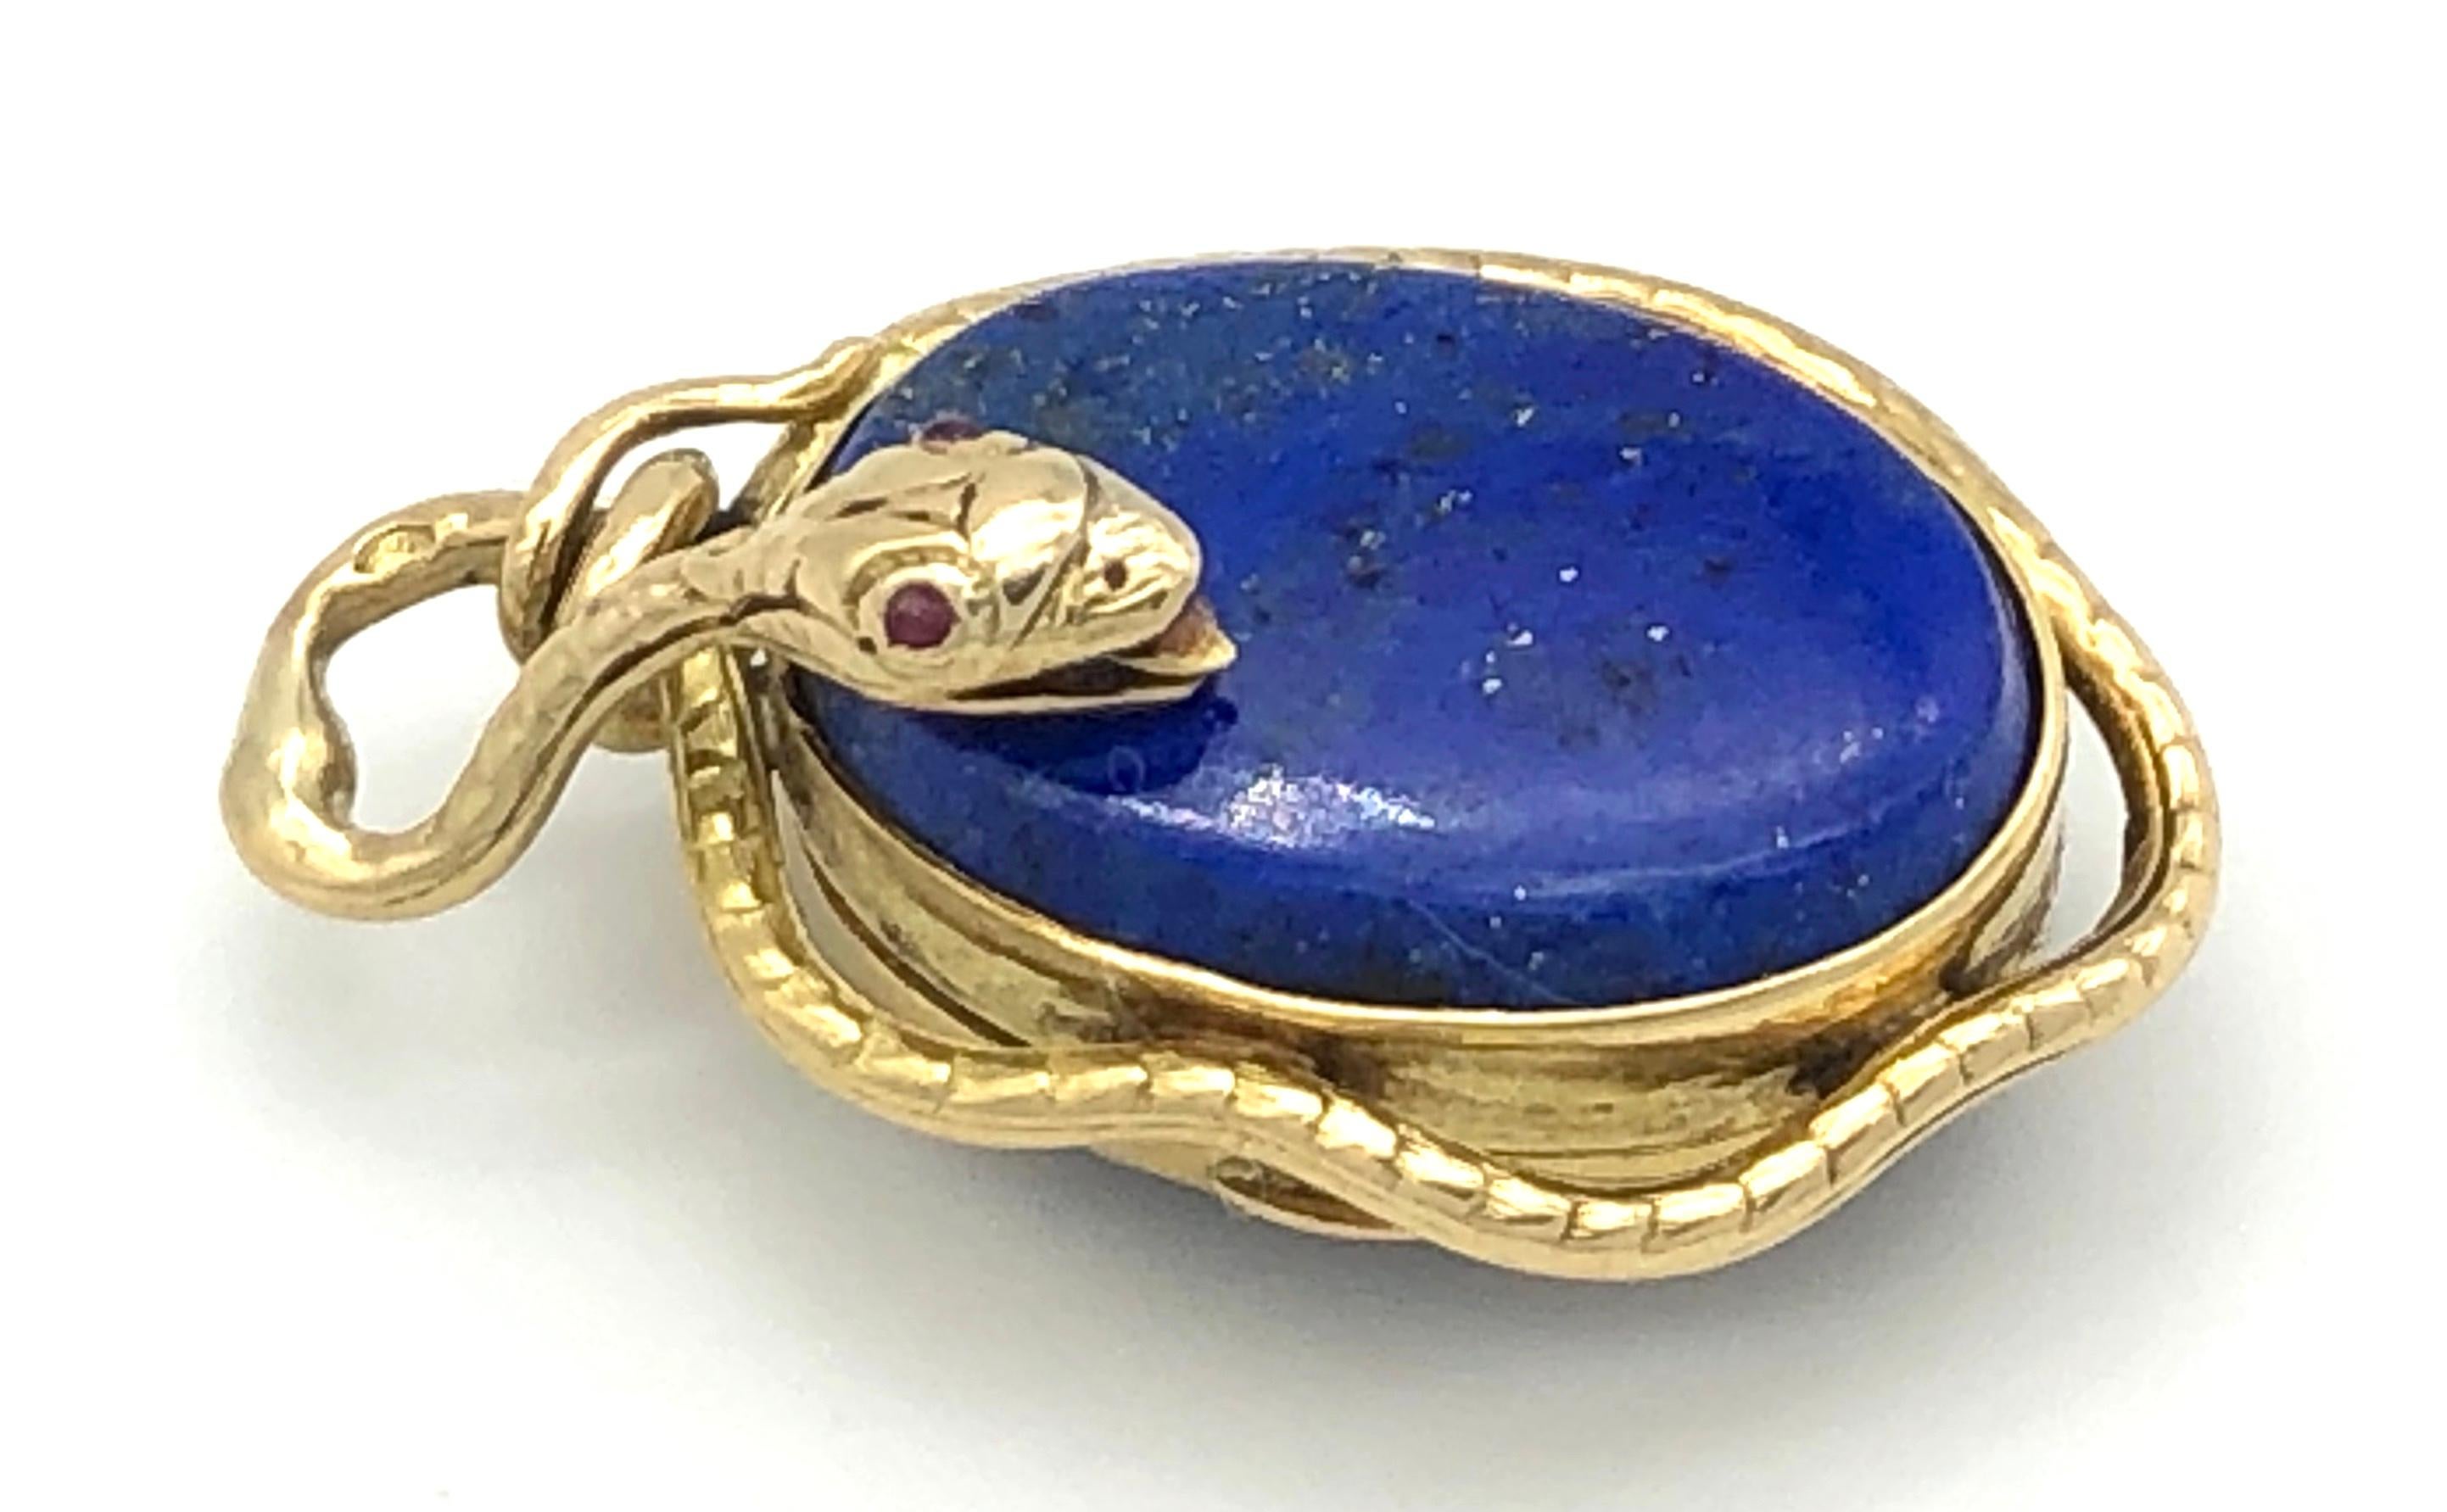  A golden snake with two rubies as eyes is curling itself around a  locket made out of 18kt gold. Either side of the pendant is decorated  with an oval lapis lazuli cabochon. The pendant is the work of a french goldsmith.

